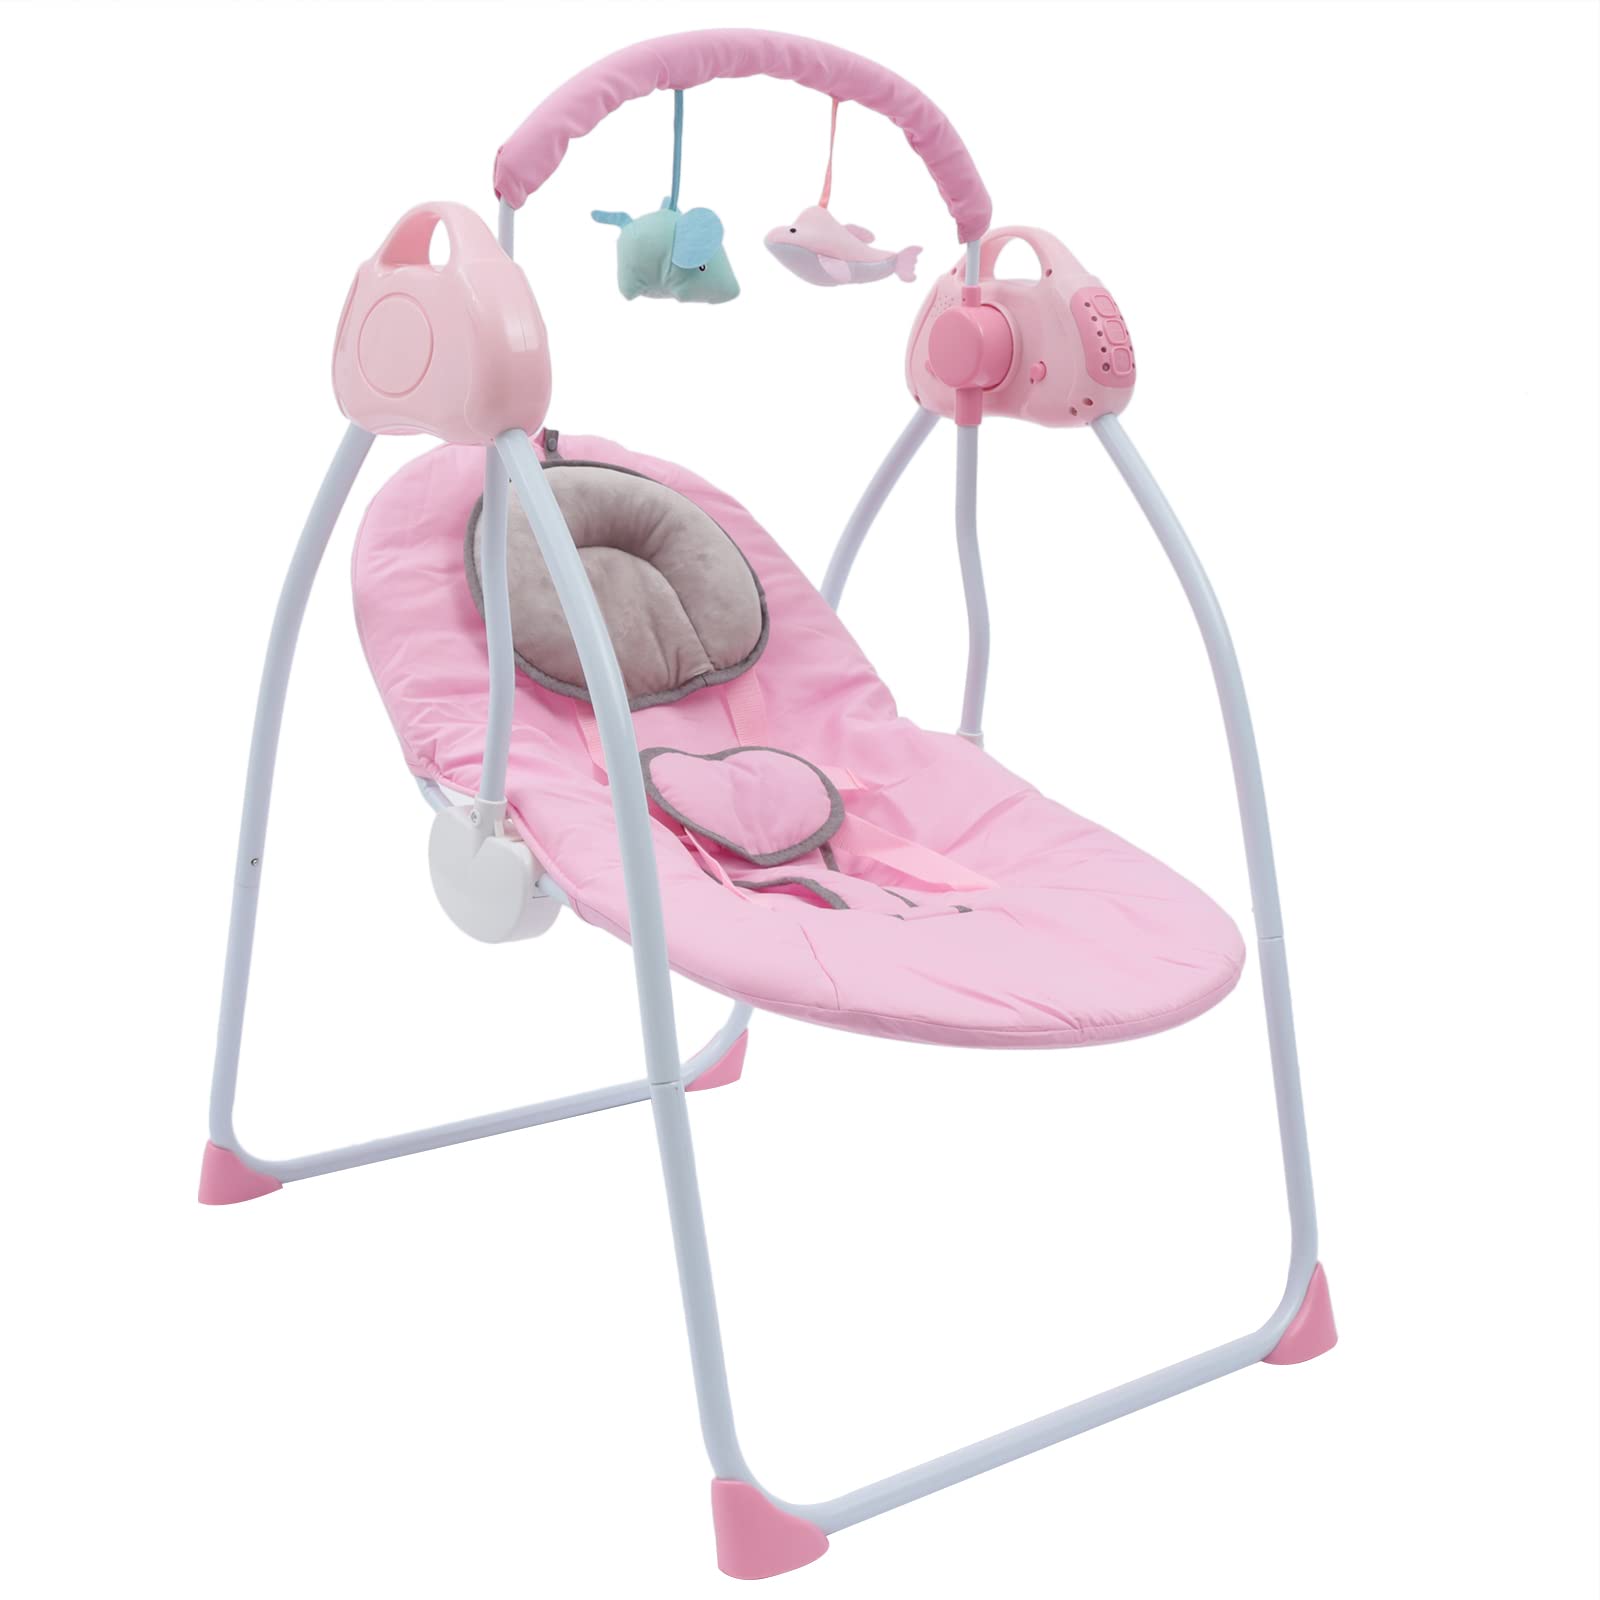 Baby Rocking Chair, Electric Baby Swings with Safety Belt, MP3 Player and Remote Control, USB Baby Bouncer Chair Baby Swings for Infants to Toddler (Pink)